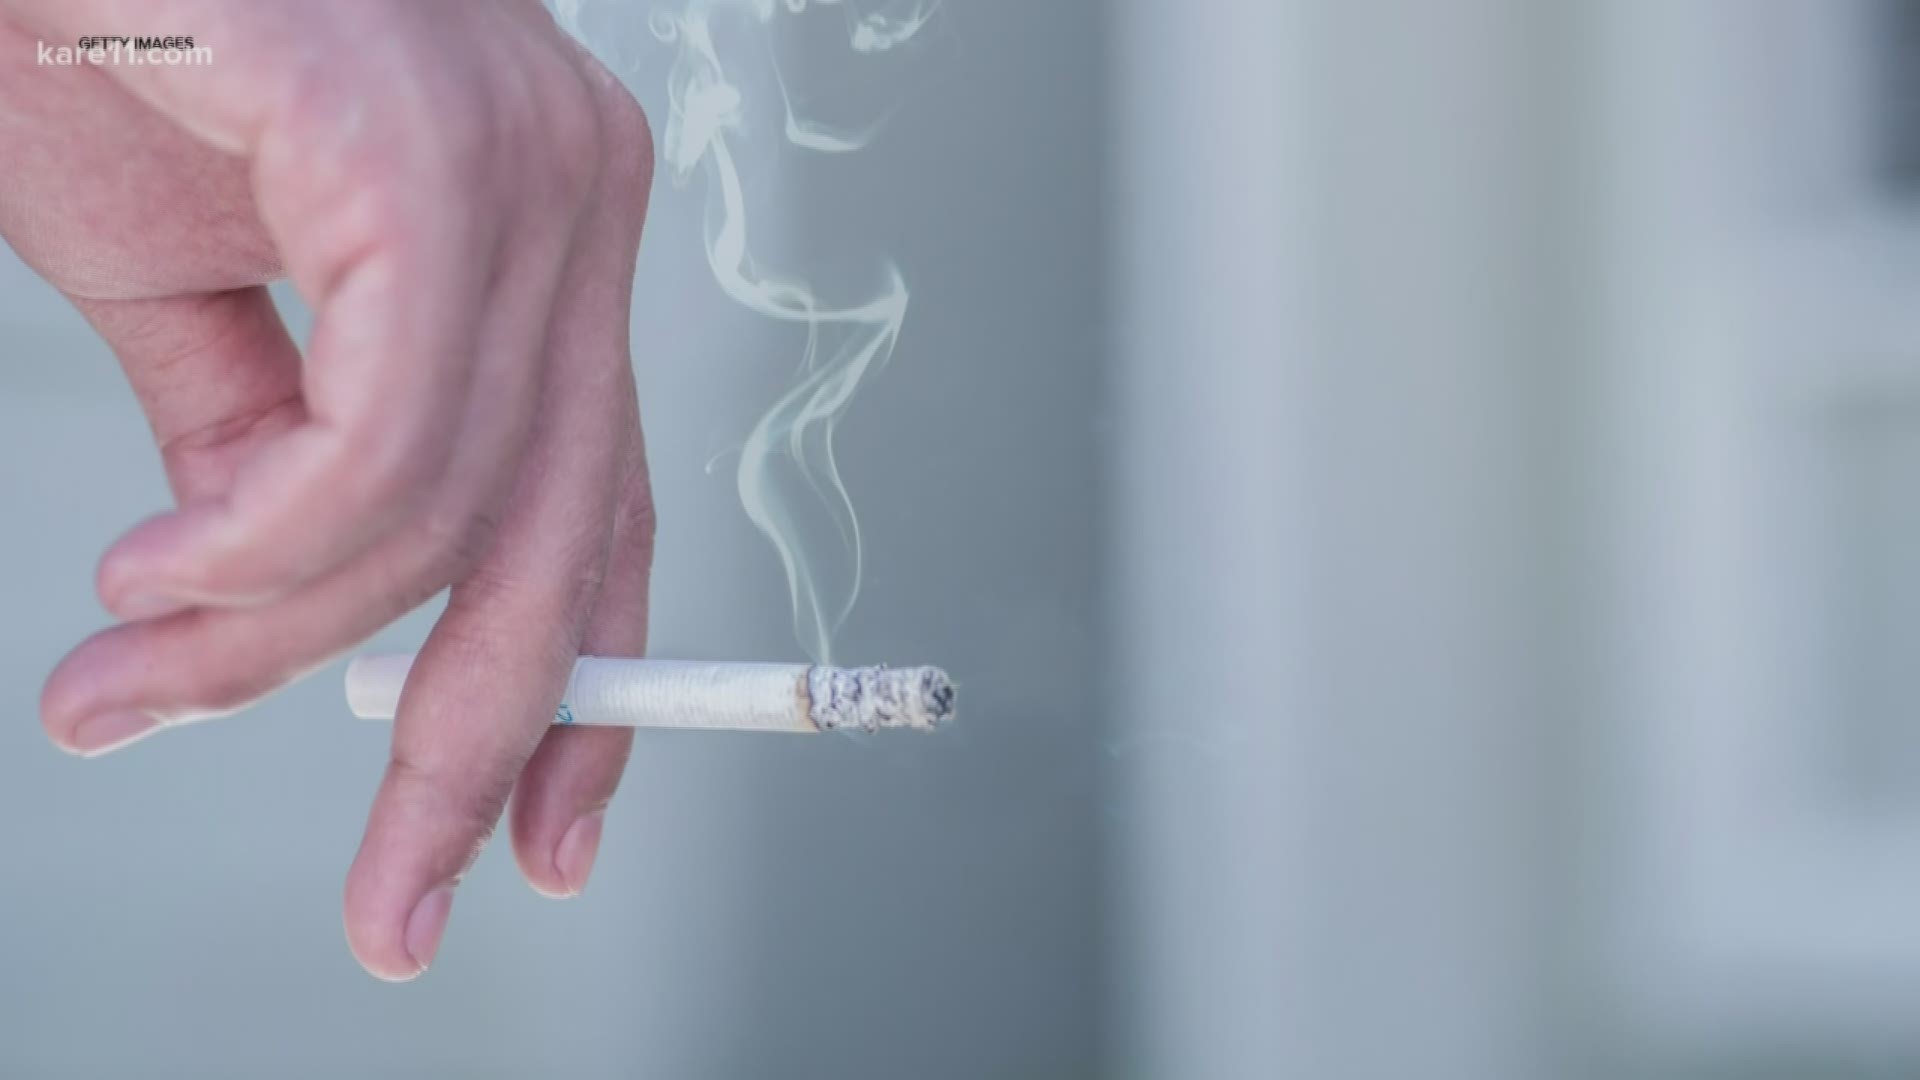 Smokers who get COVID-19 may be at a higher risk of a more severe infection, according to a Mayo Clinic doctor